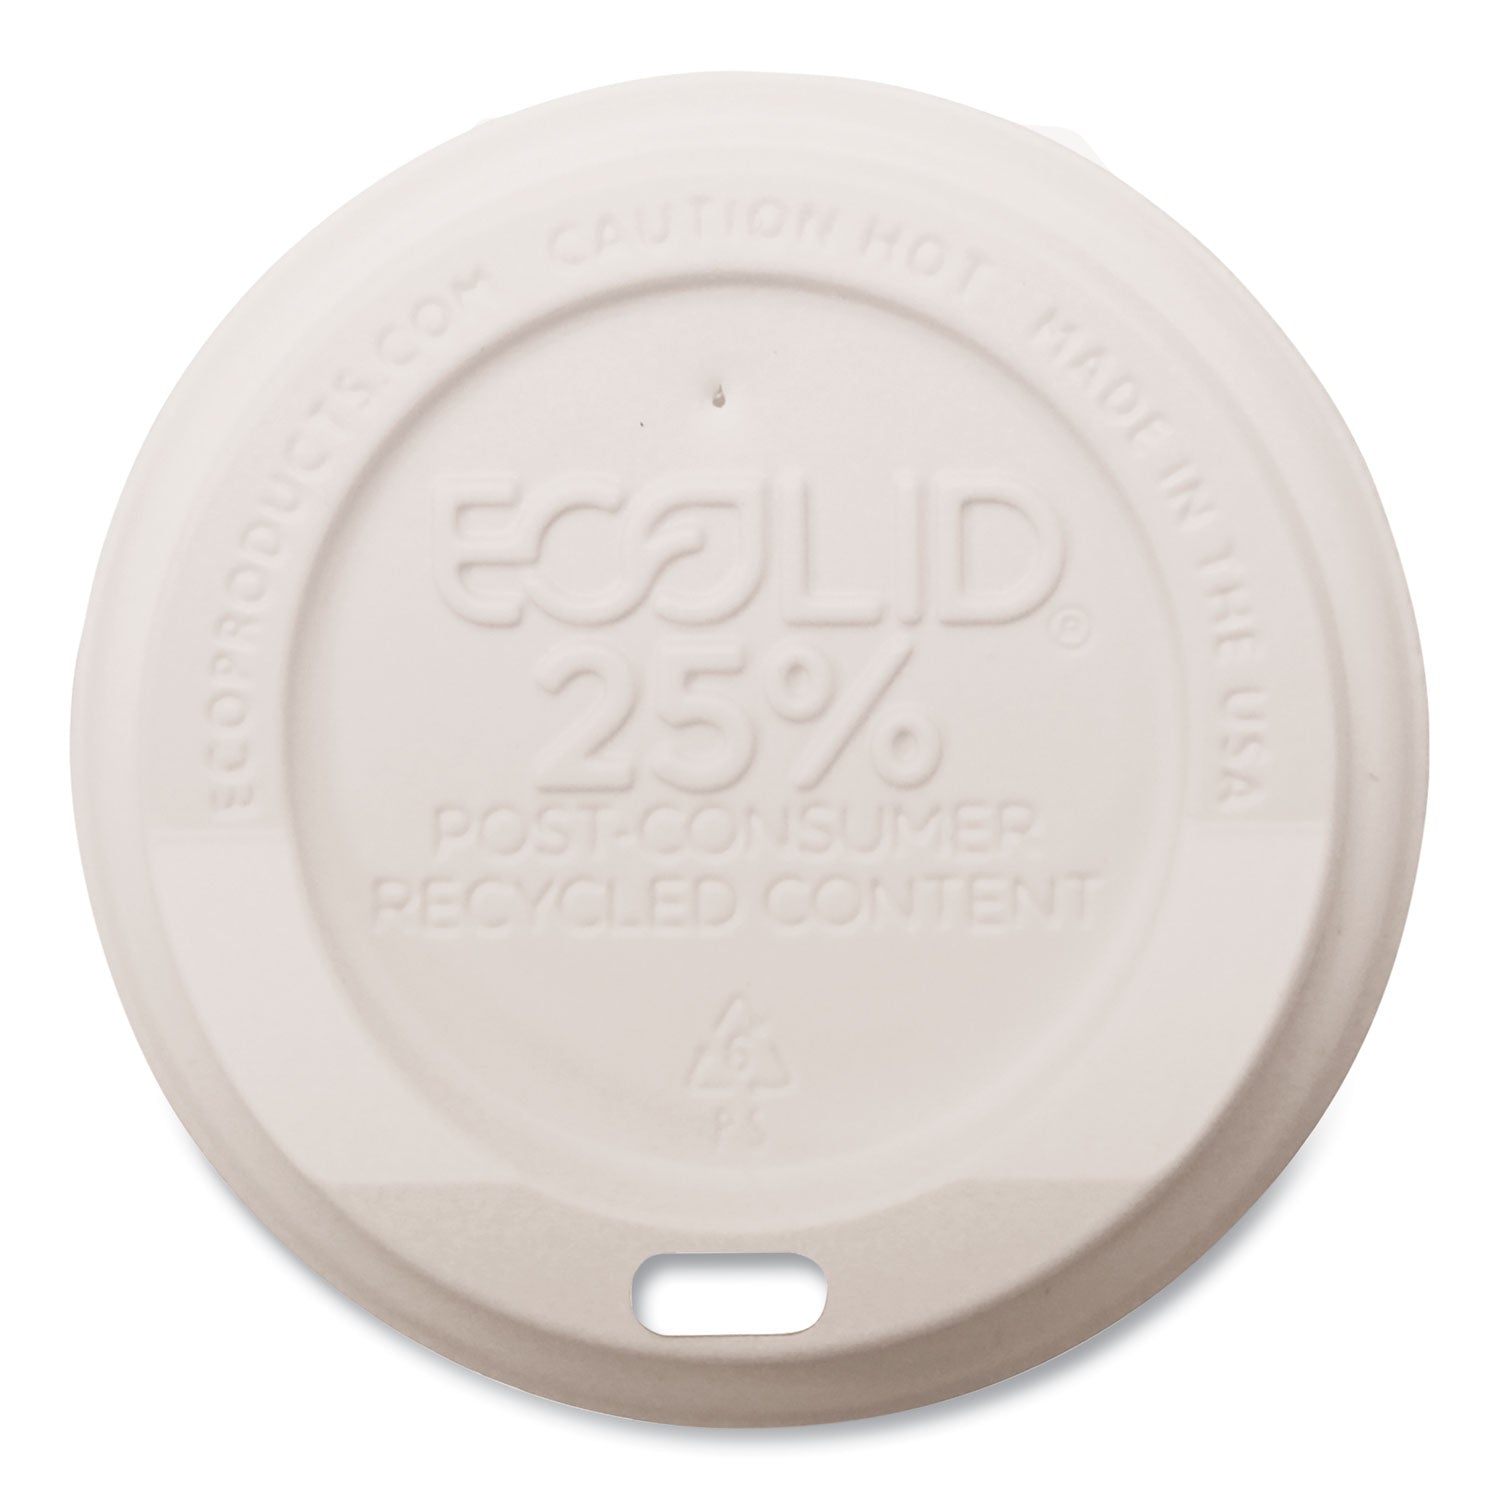 EcoLid 25% Recycled Content Hot Cup Lid, White, Fits 8 oz Hot Cups, 100/Pack, 10 Packs/Carton - 